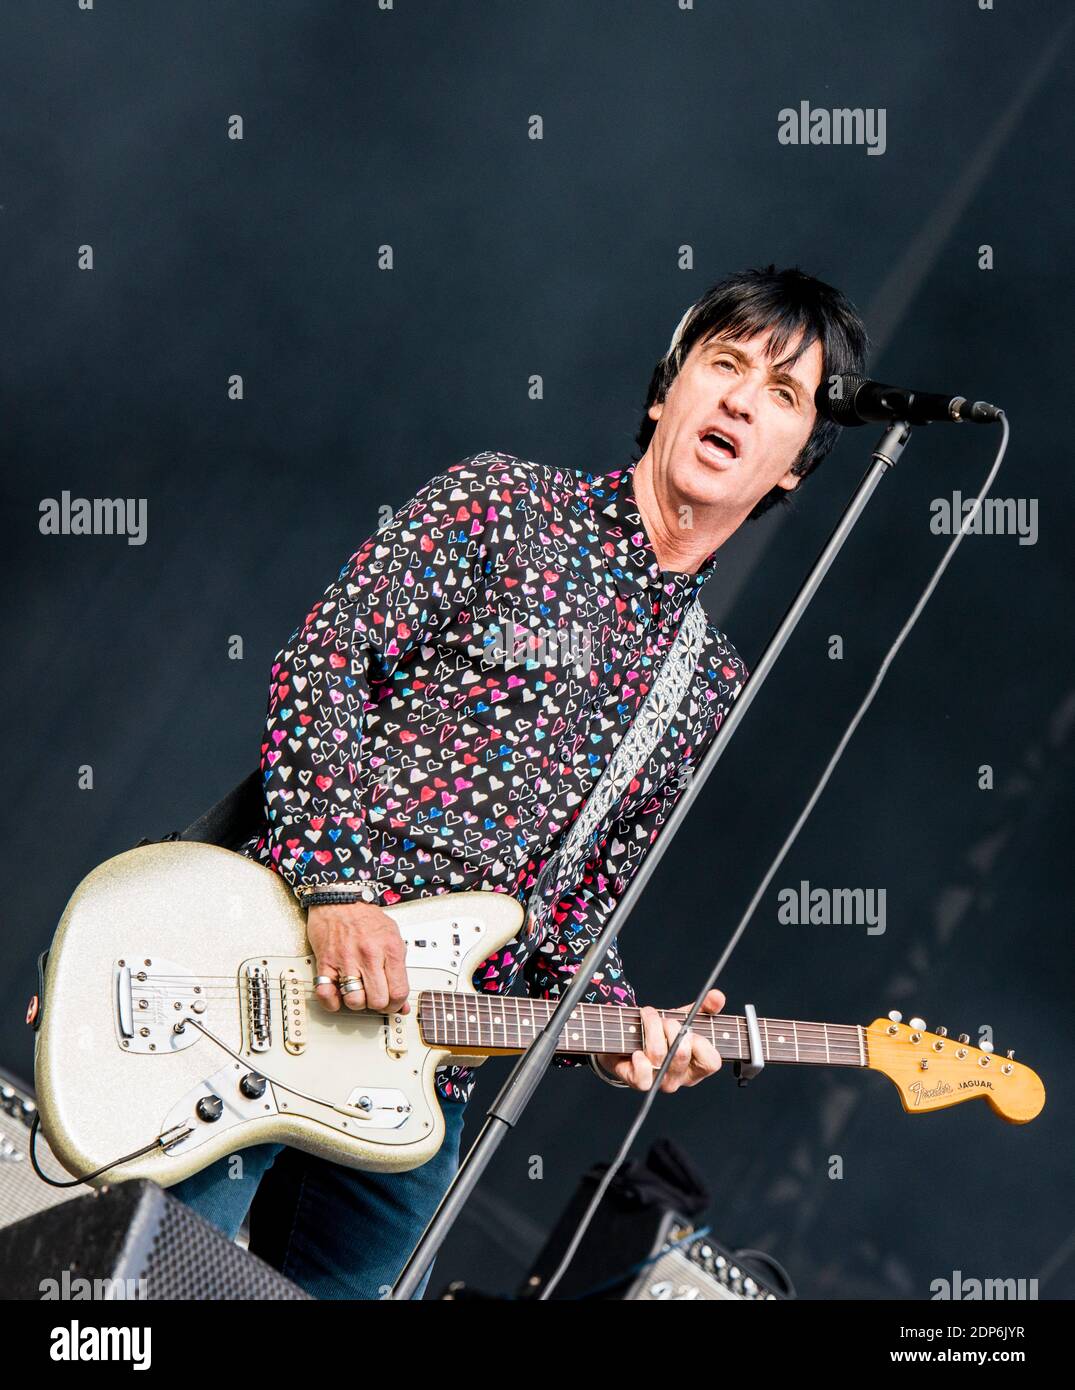 London, England, 25.05.2019. British singer and guitarist Johnny Marr performing live at the All Points East music festival at Victoria Park. Stock Photo